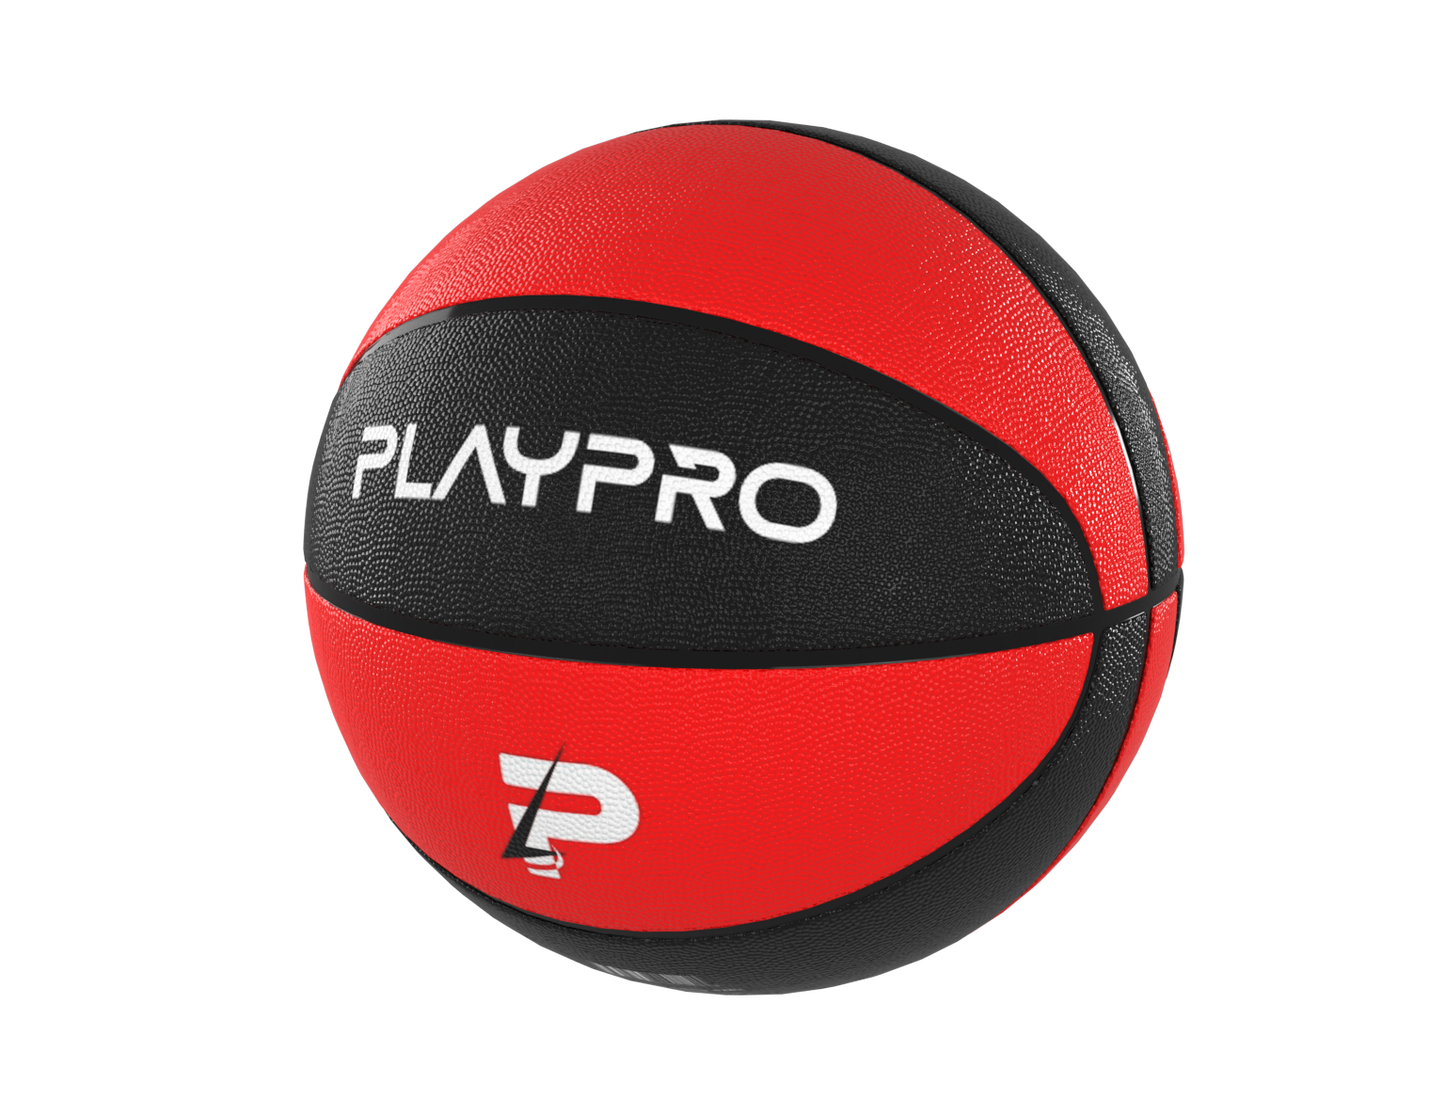 Premium Rubber Basketball for Kids and Adults – Max Grip, Perfect Bounce and Rebound with Extended Air Retention - Red and Black